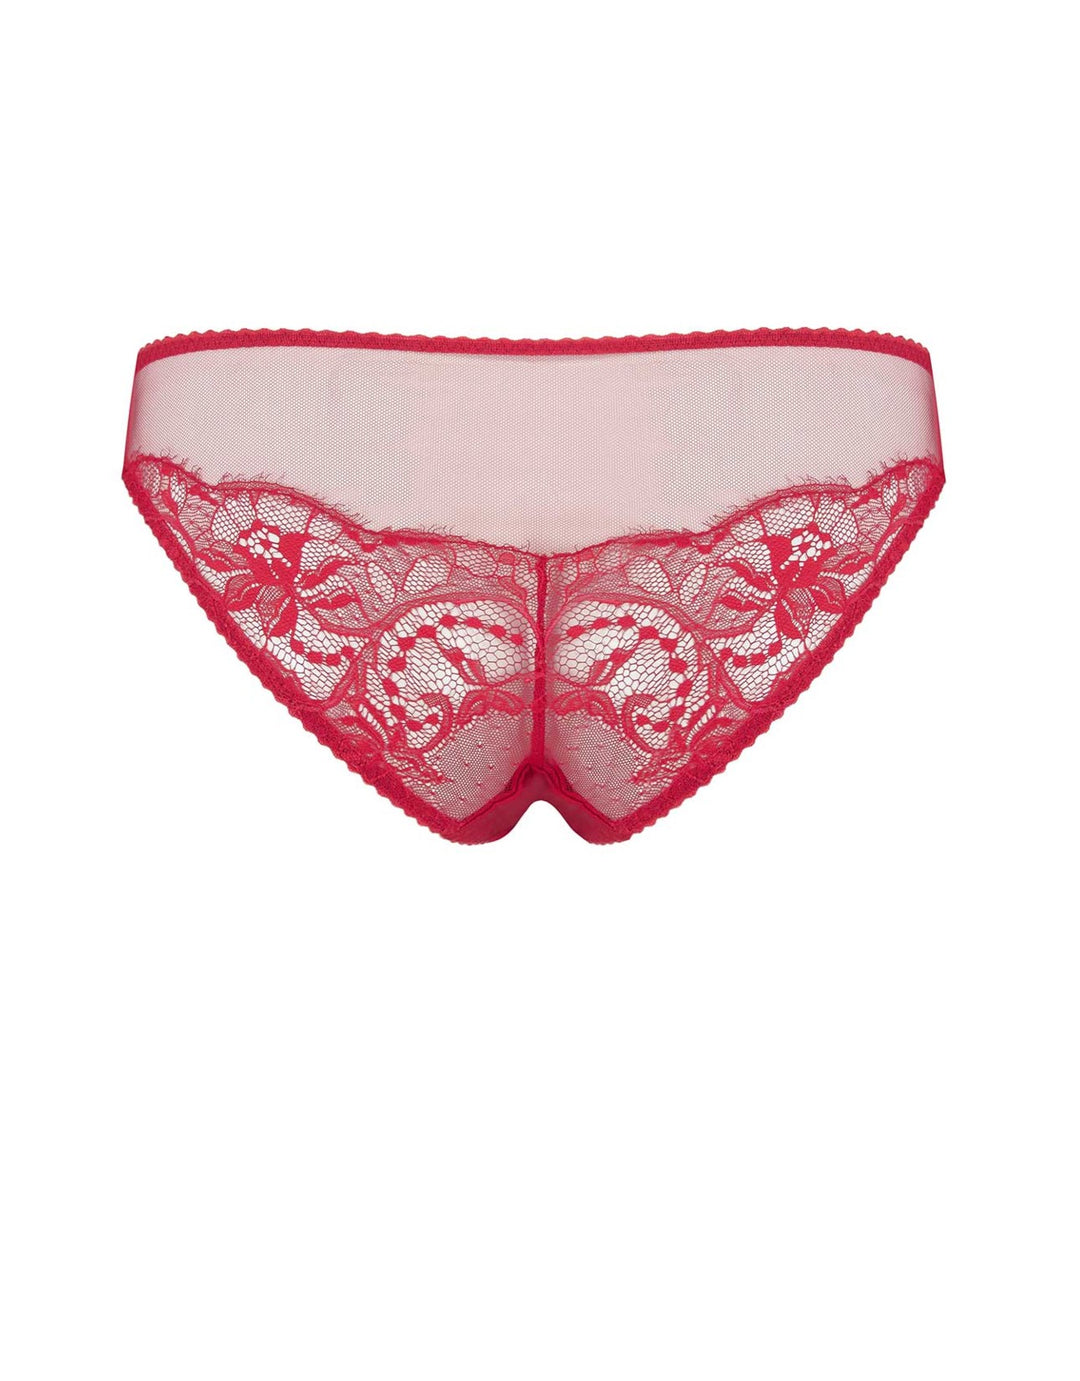 Fleur of England Adeline Red Lace Brief